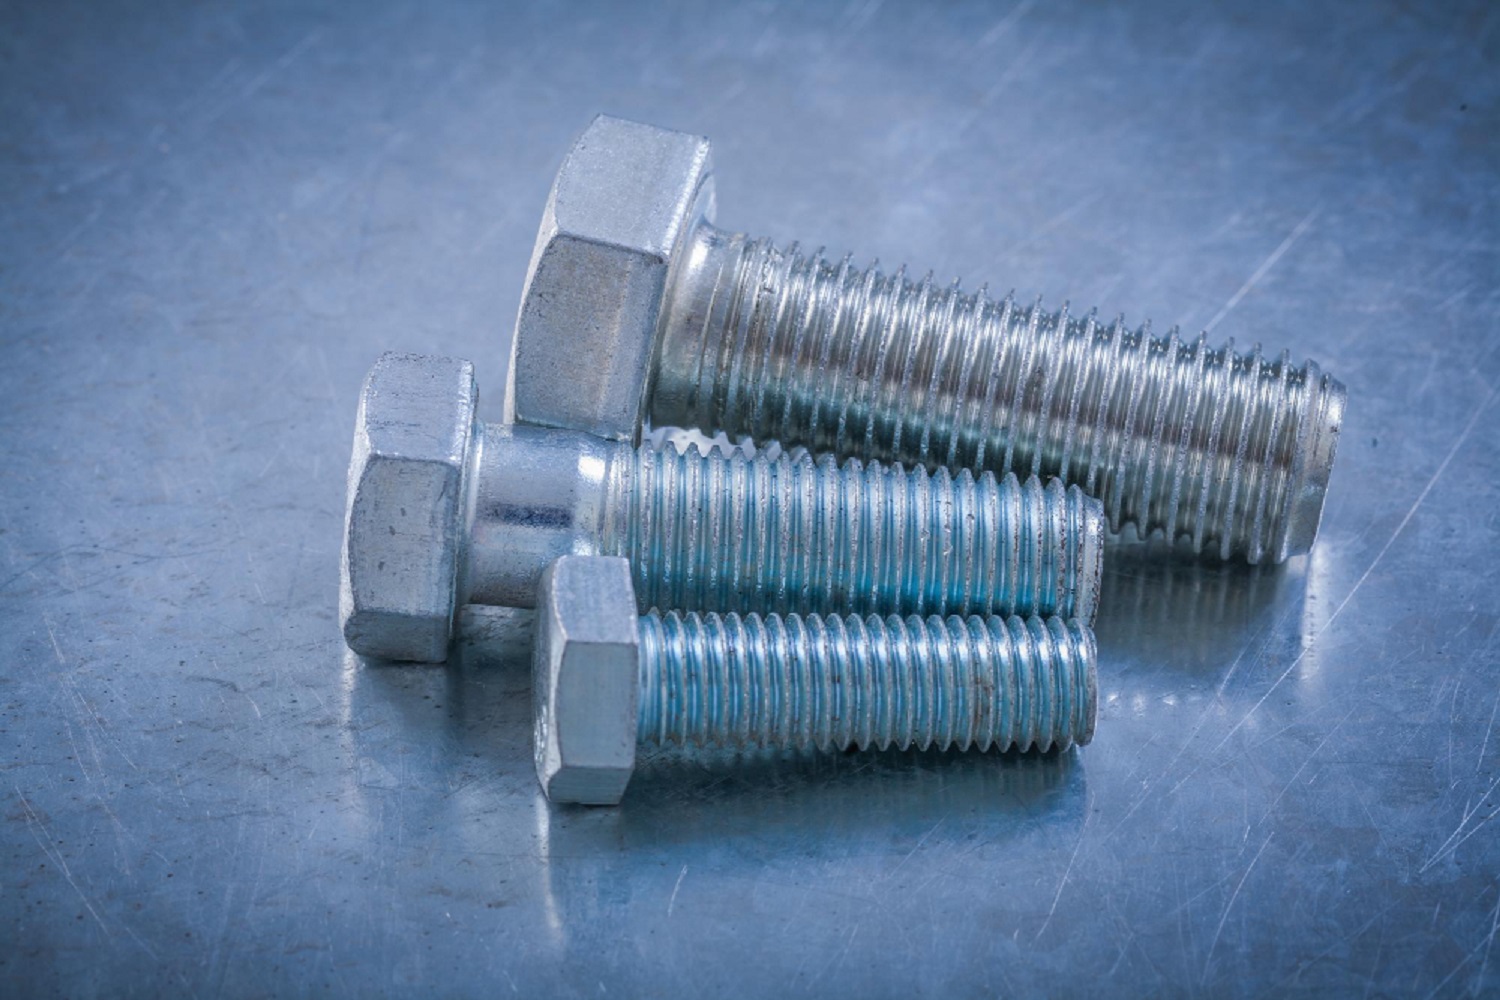 Stainless Steel 430 Fasteners